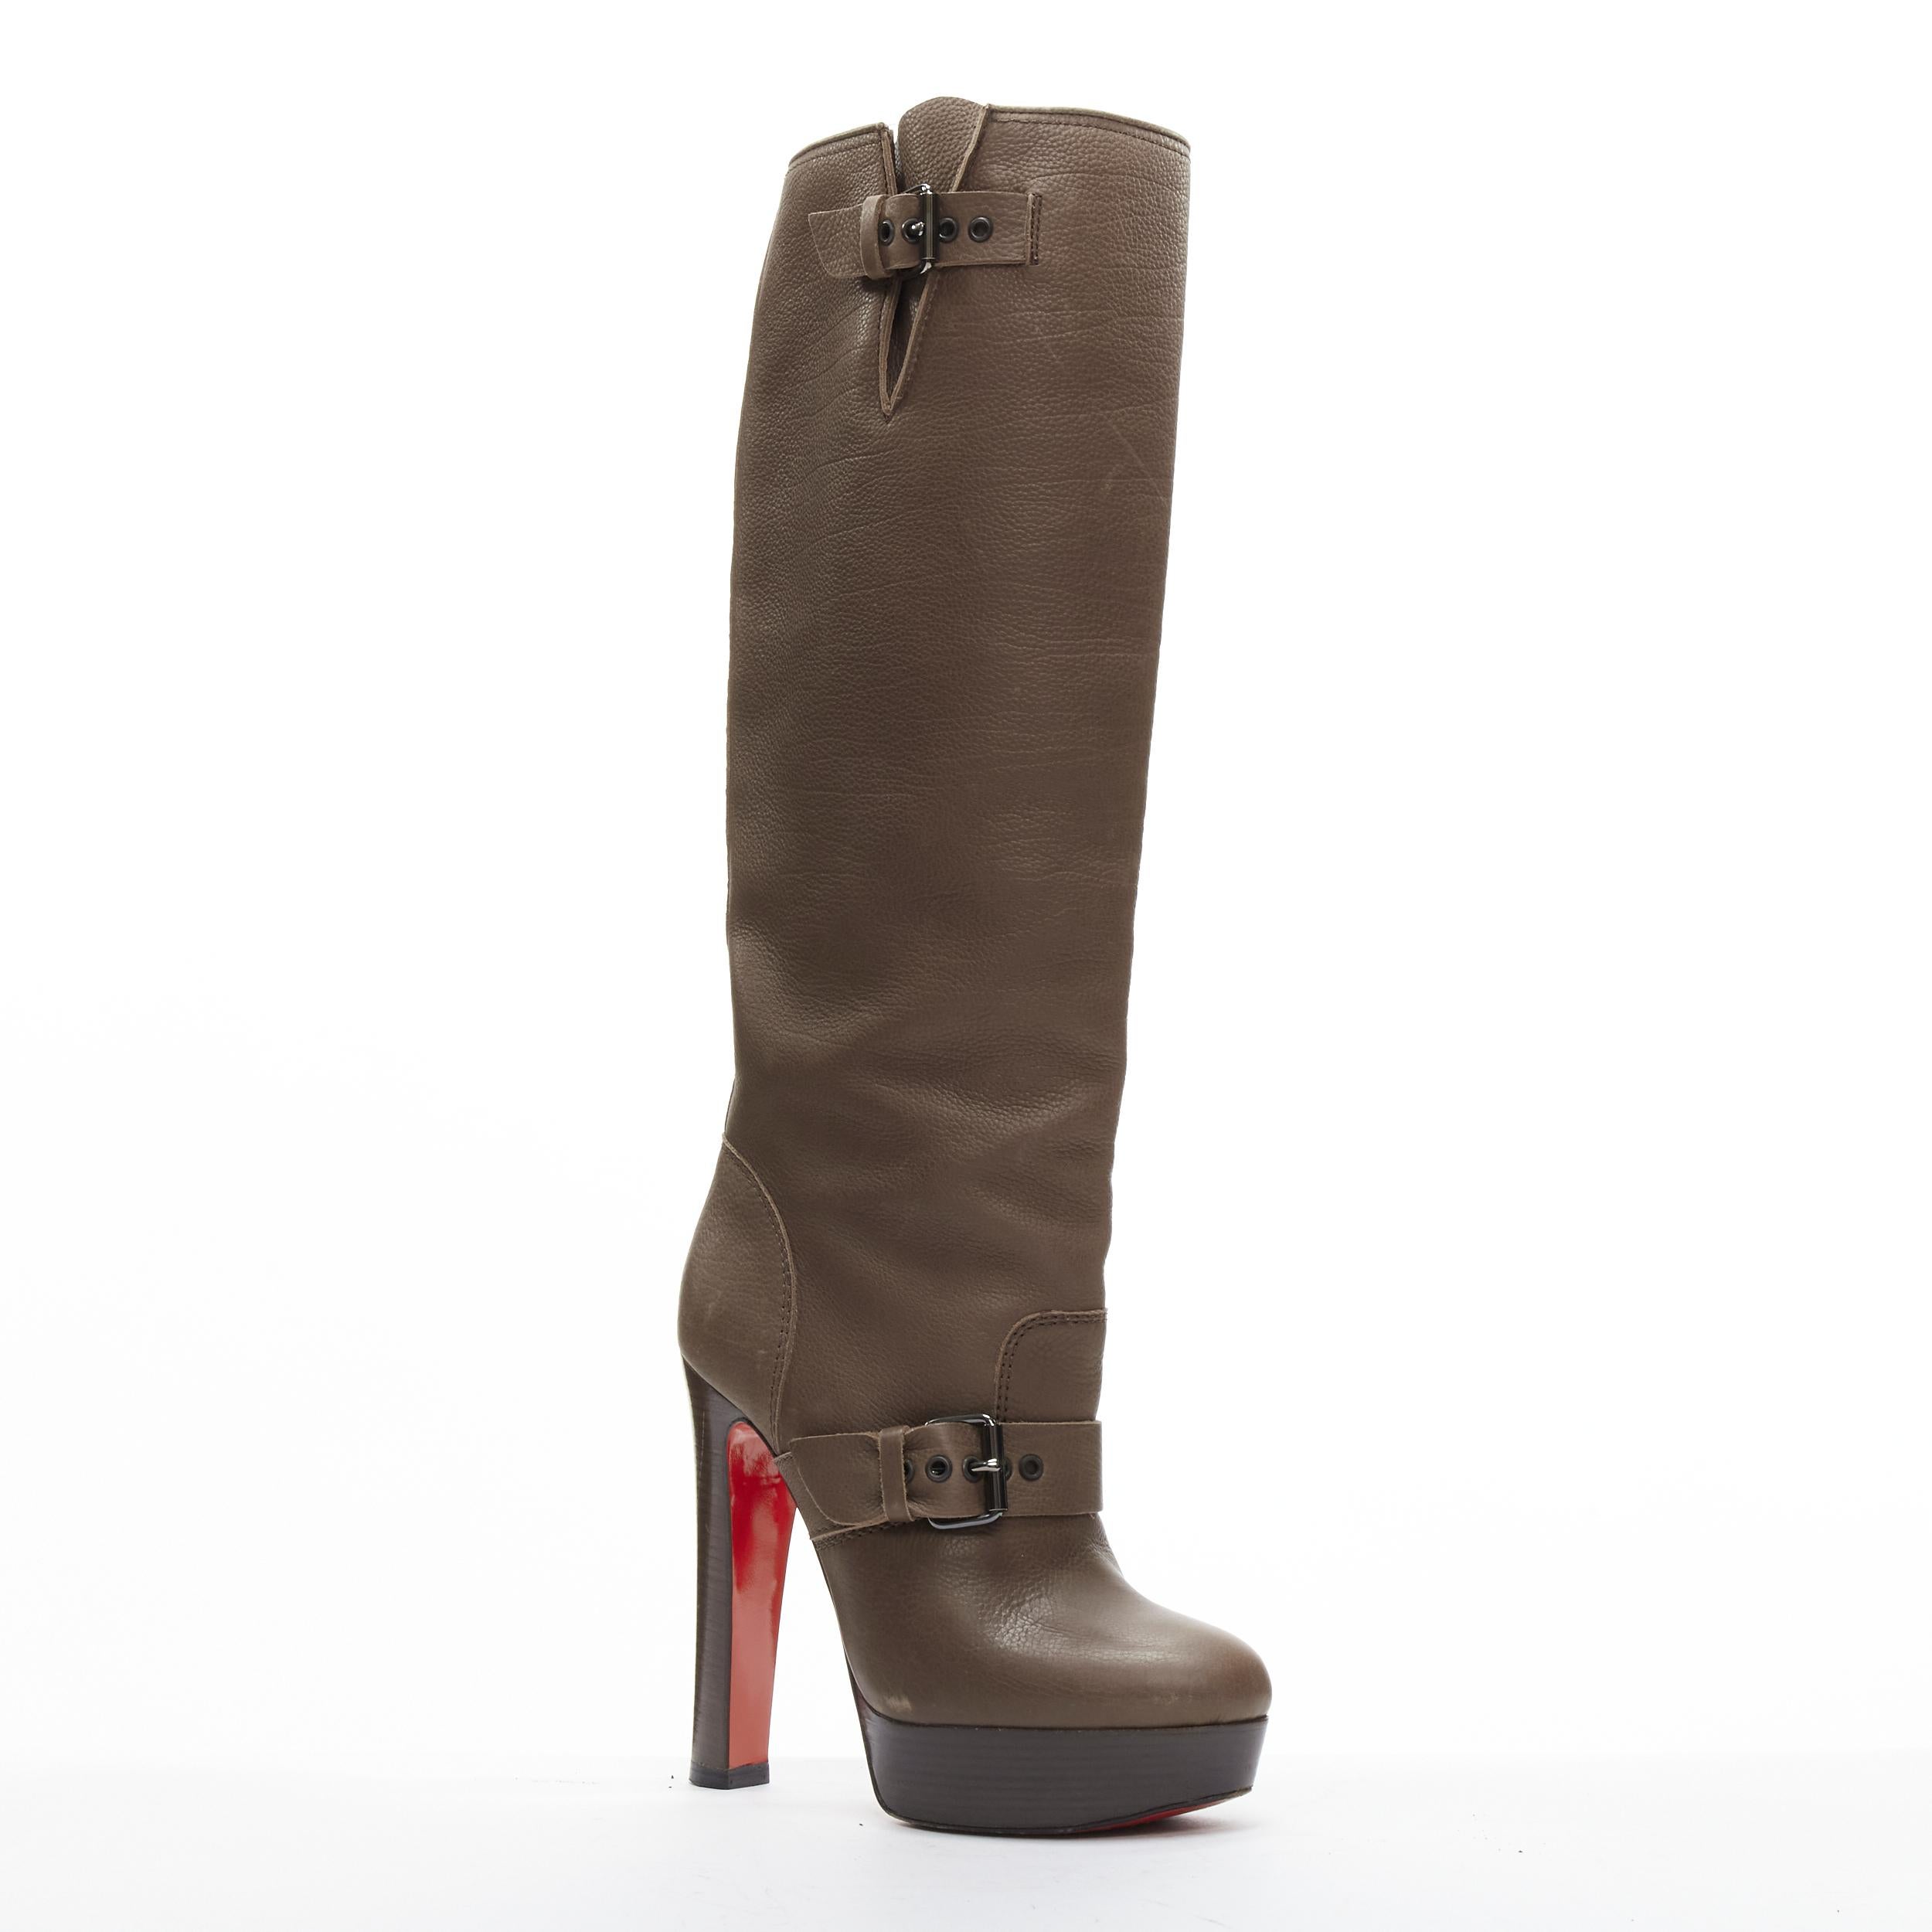 CHRISTIAN LOUBOUTIN Harletty 140 buckle brown platform knee biker boots EU37
Reference: TGAS/C01661
Brand: Christian Louboutin
Model: Harletty 140
Material: Leather
Color: Brown
Pattern: Solid
Closure: Buckle
Lining: Leather
Extra Details: